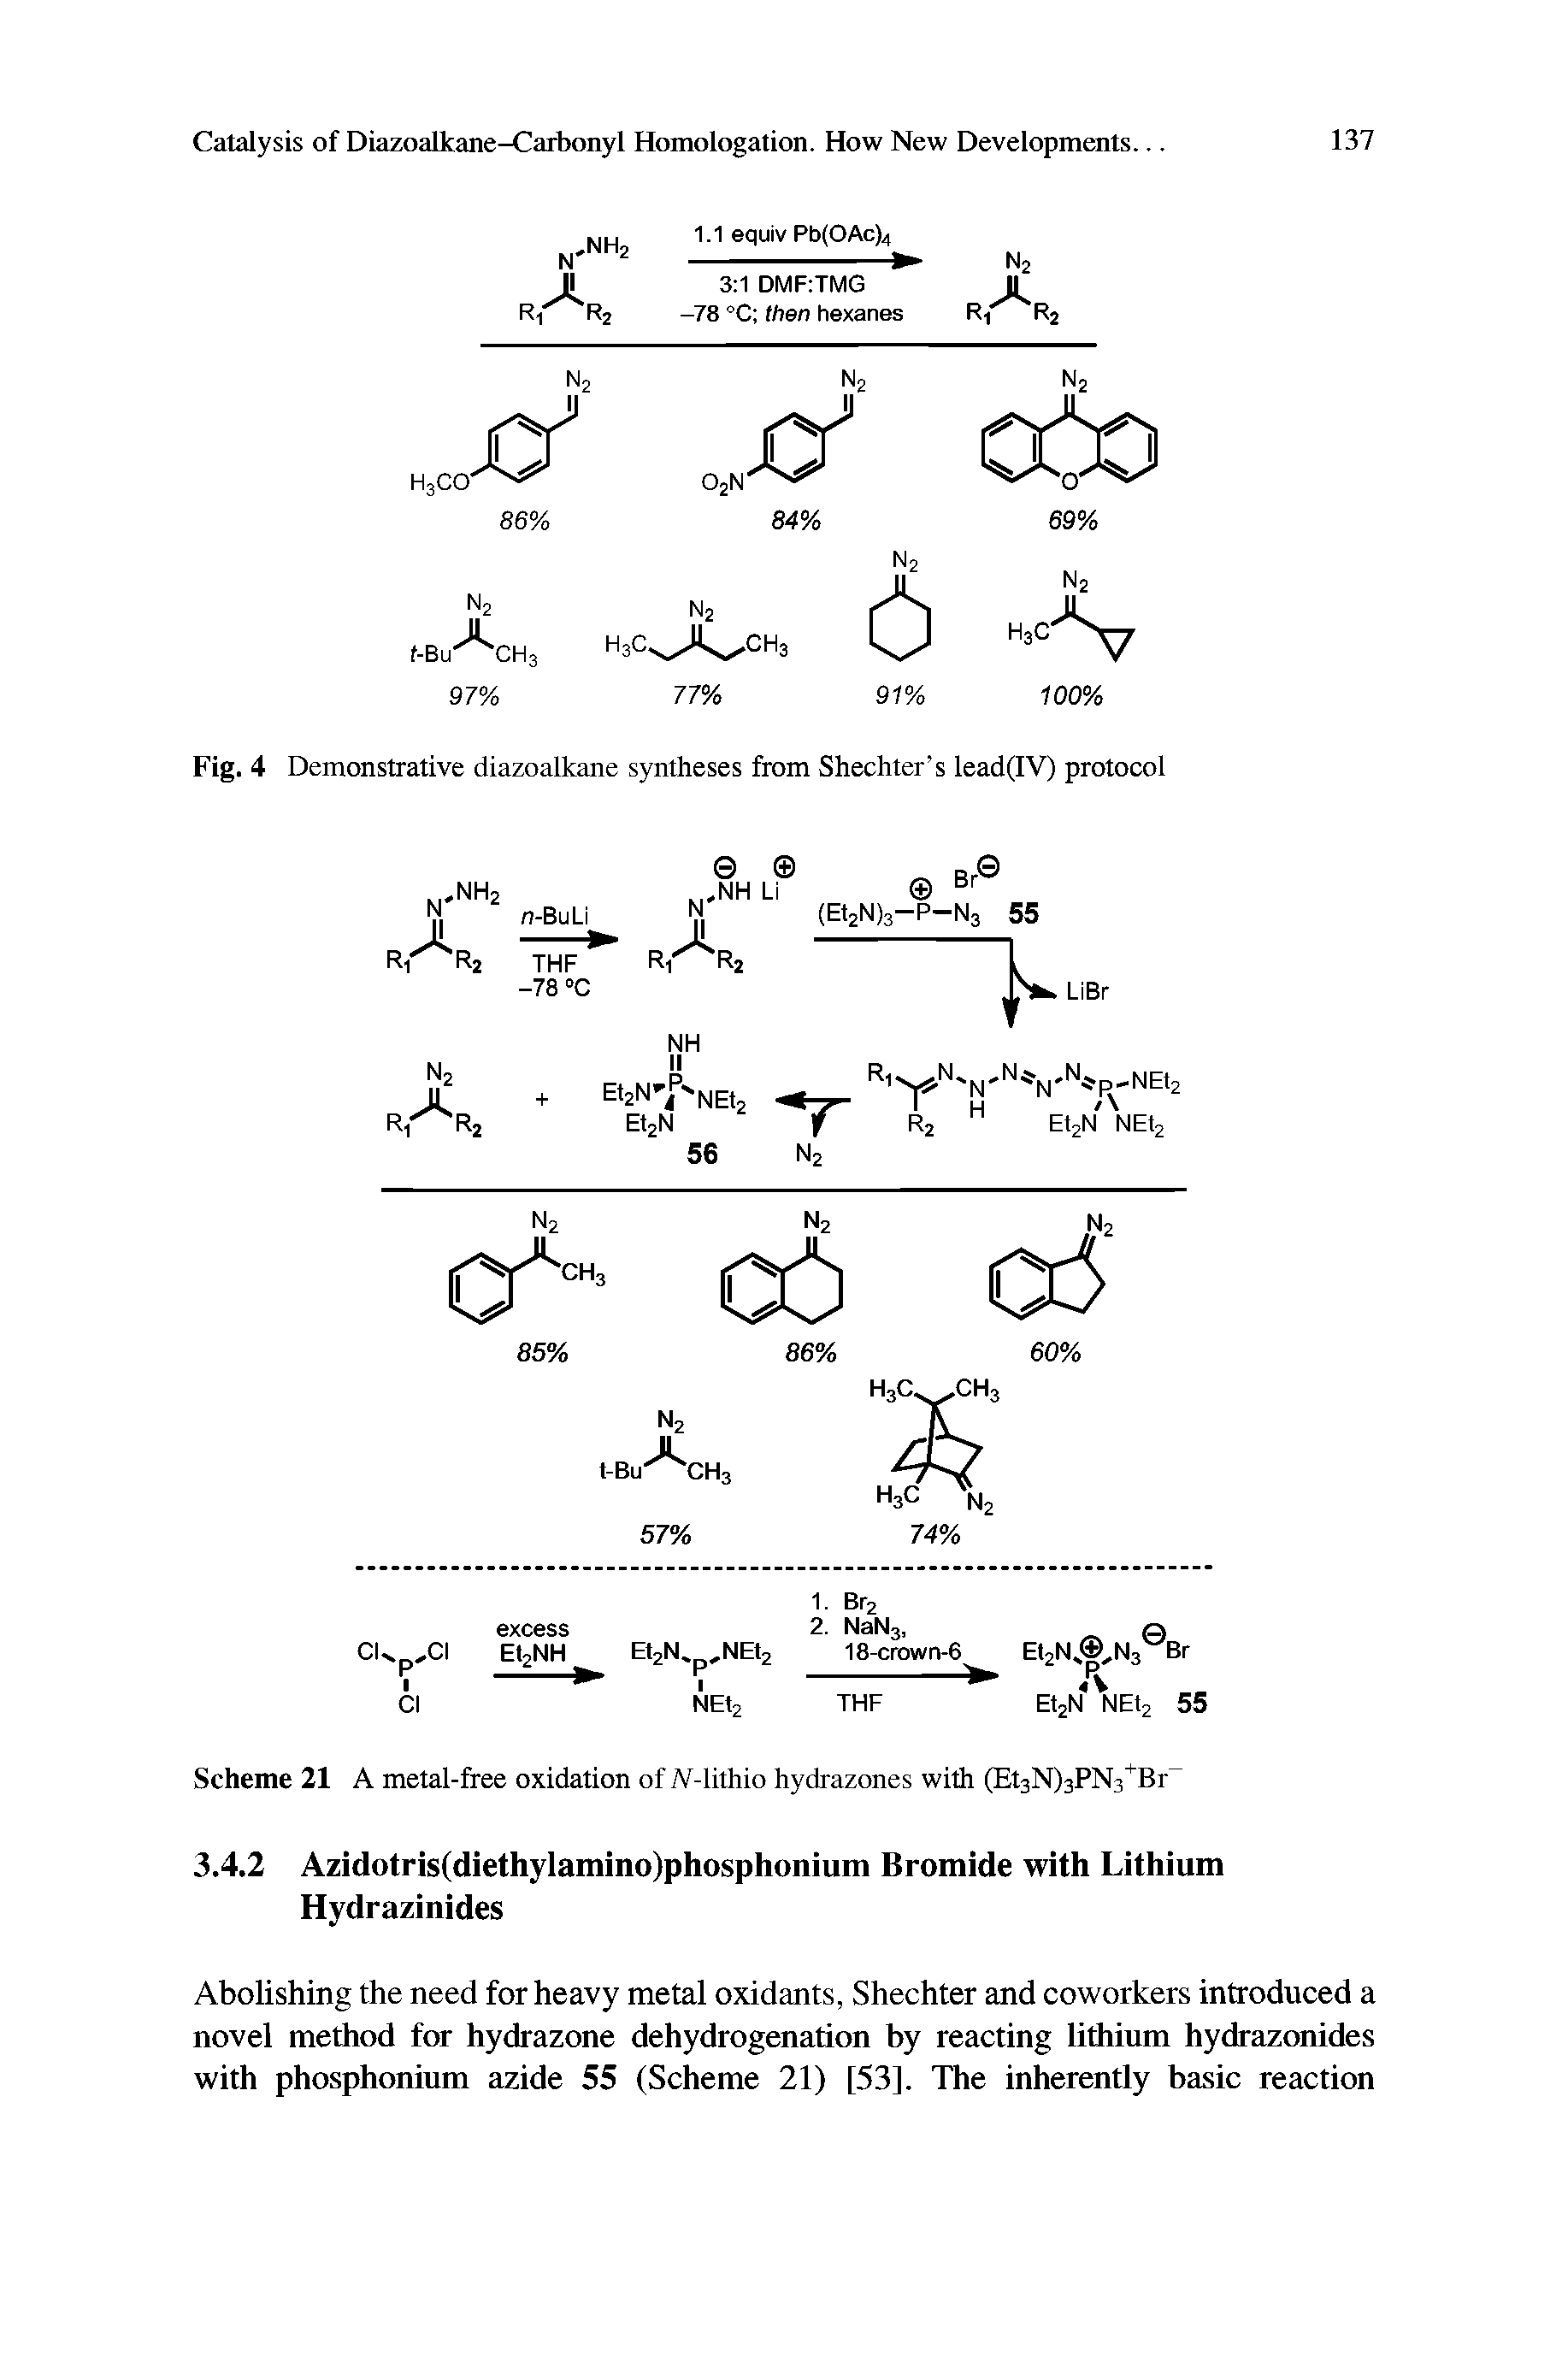 Scheme 21 A metal-free oxidation of iV-lithio hydrazones with (EtsNlsPNs Br"...